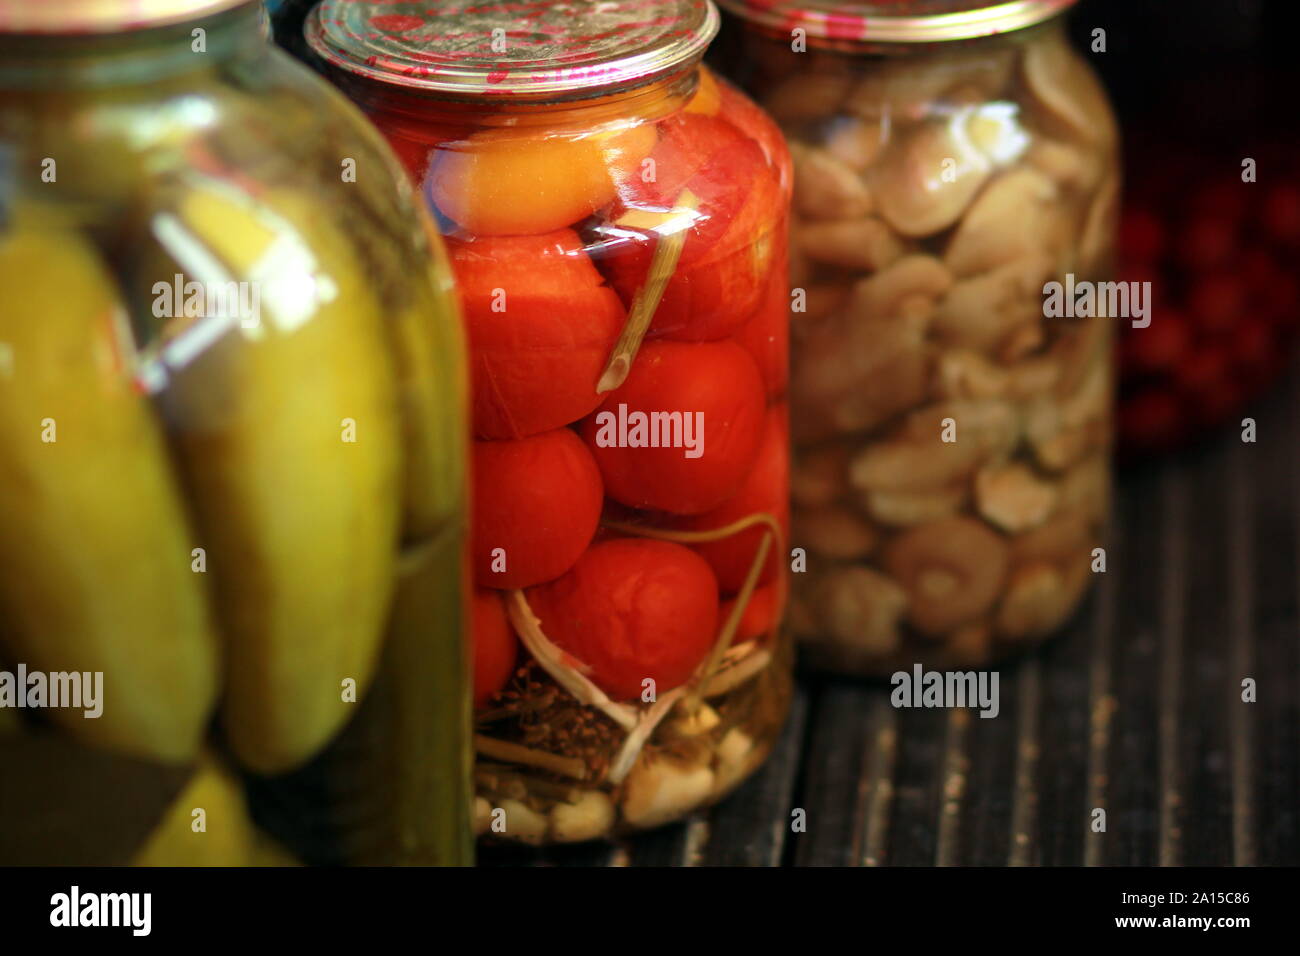 Row of jars with pickled tomatoes, cucumbers and mushrooms standing on black wooden floor Stock Photo